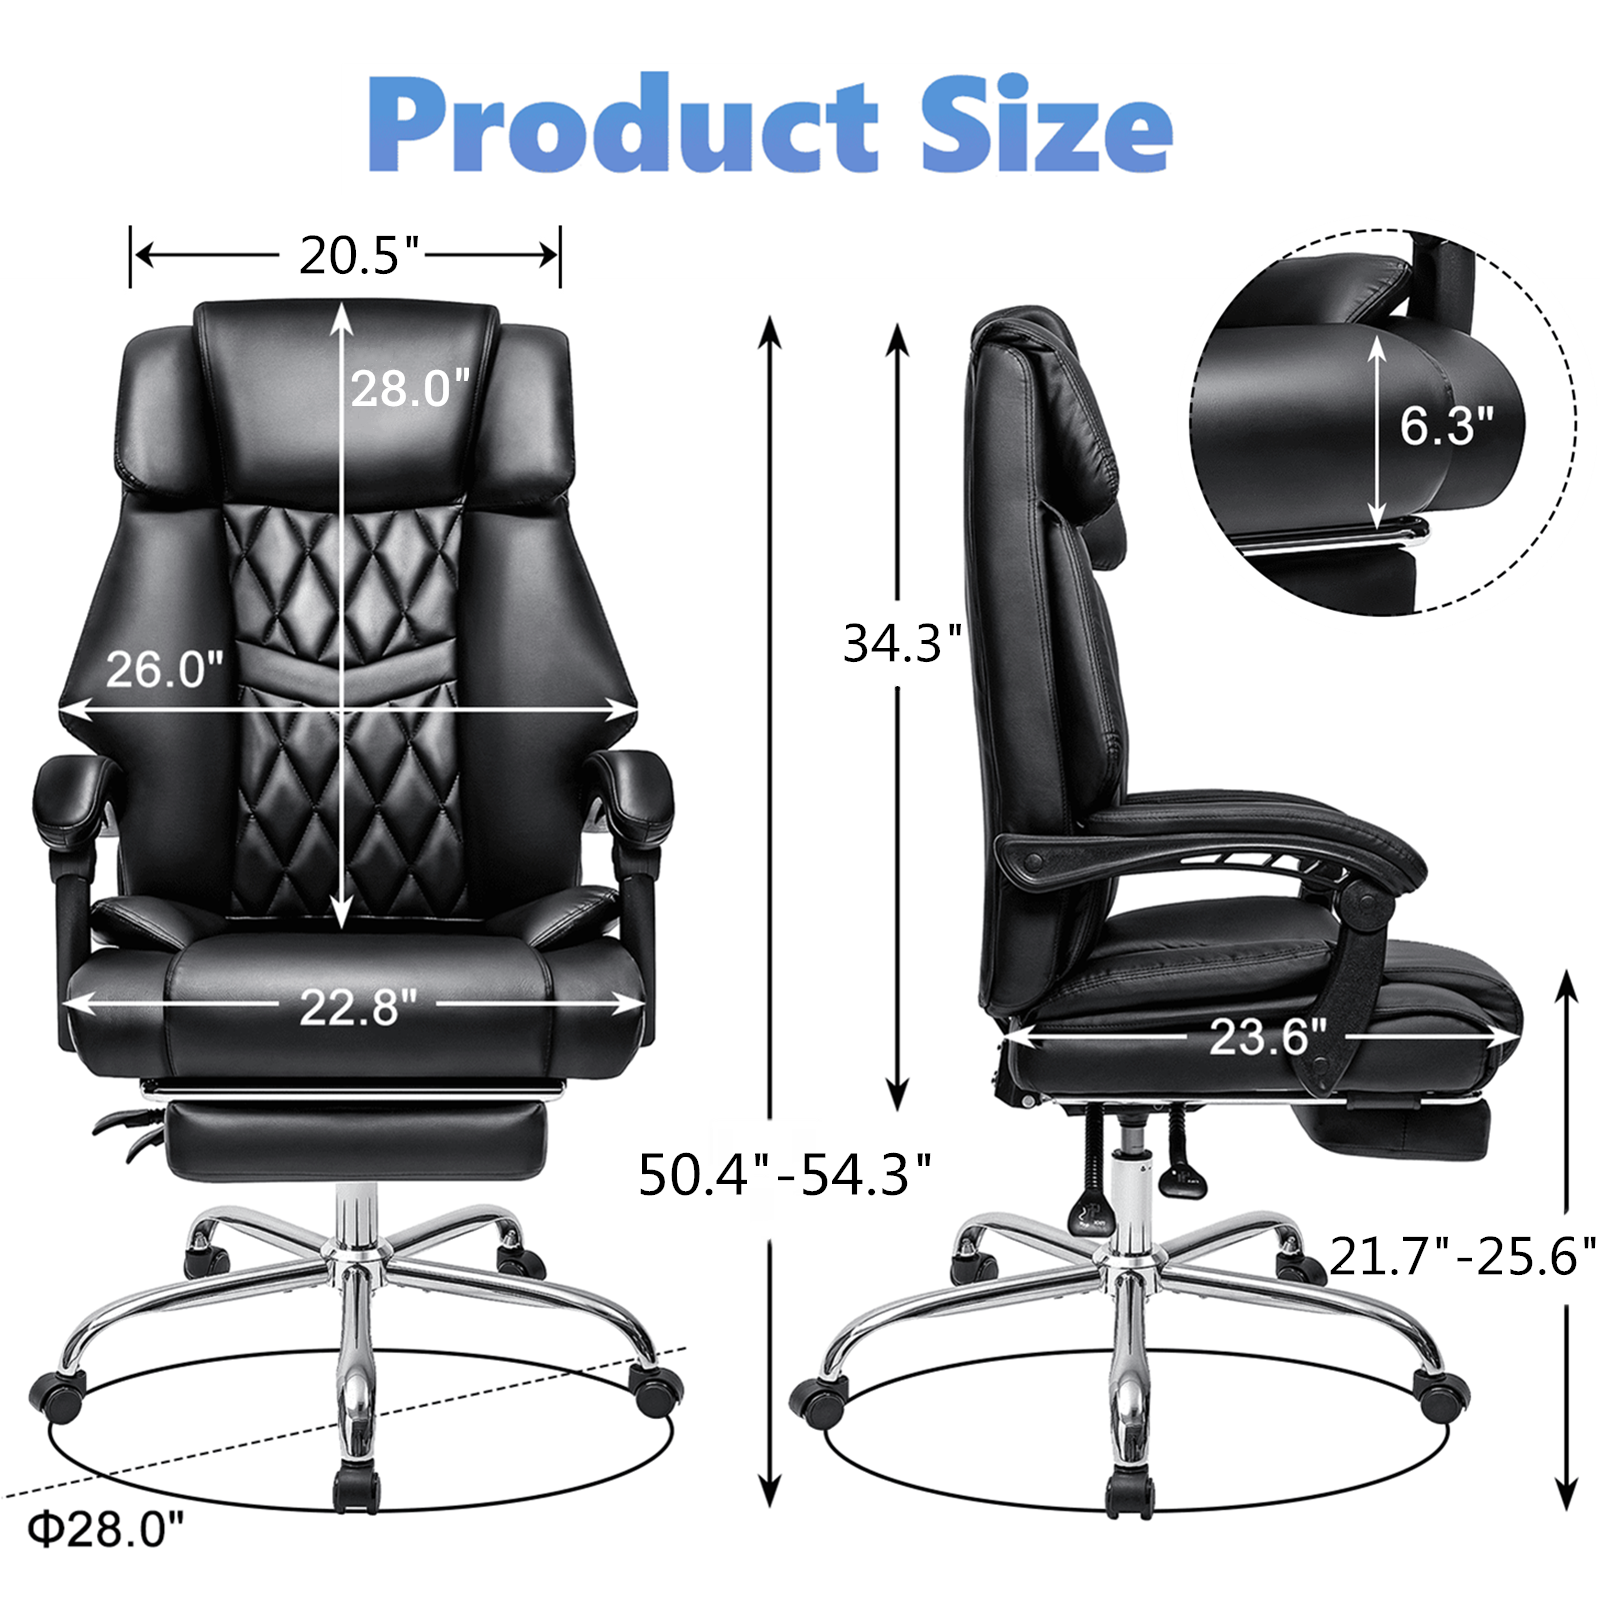 Hoffree Executive Office Chair Big and Tall Office Chair 550lb Wide Seat Ergonomic Computer Desk Chair High Back Leather Chair with Lumbar Back Support for Home Office Black - image 4 of 9